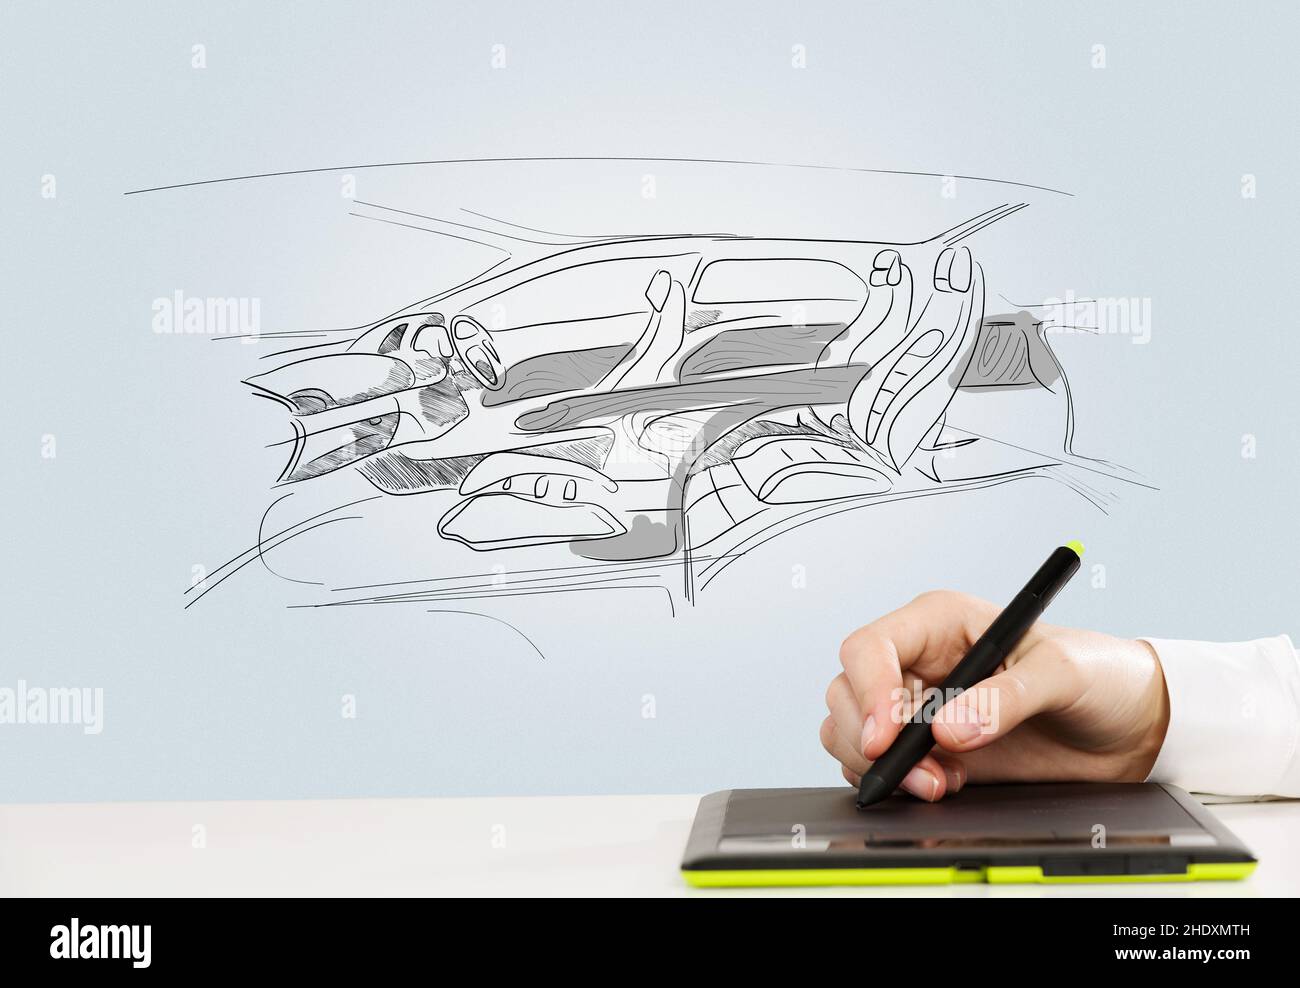 car, product design, graphics tablet, illustrating, cars, industrial design, product designs, graphics tablets Stock Photo